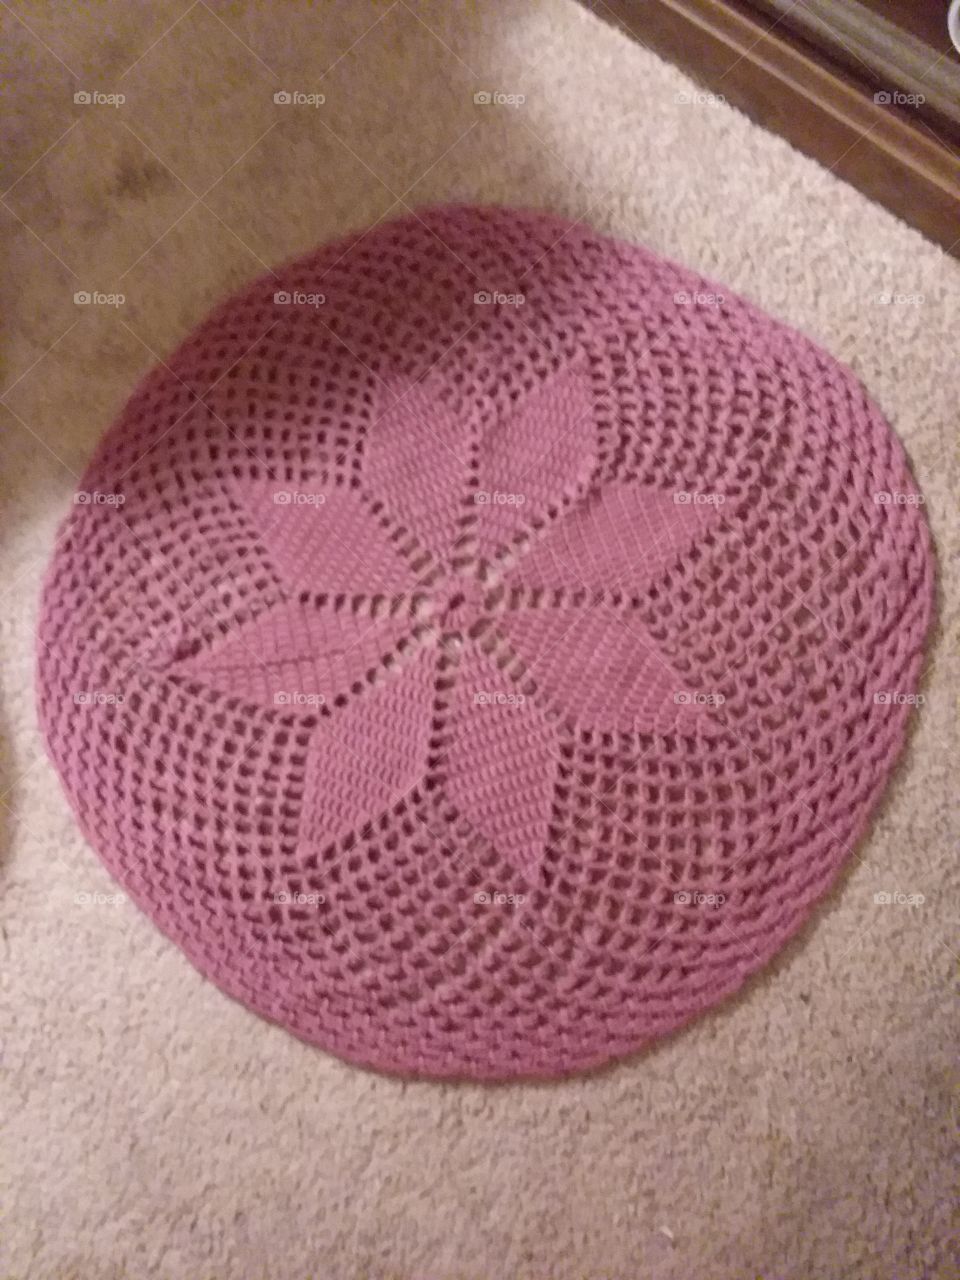 Hand made crocheted spread